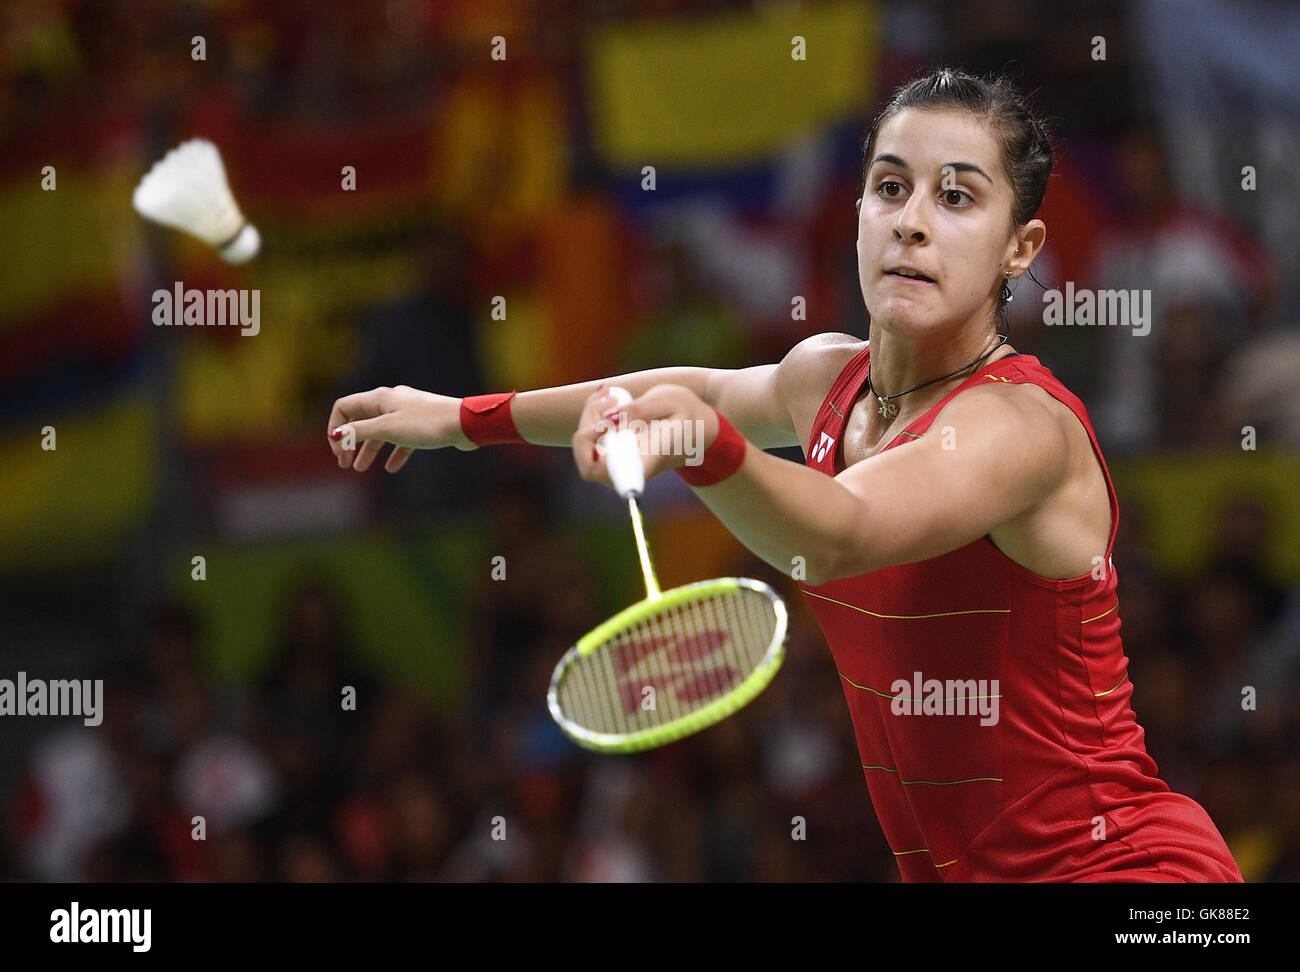 Rio De Janeiro, Brazil. 19th Aug, 2016. Spain's Carolina Marin competes during the women's singles badminton gold medal match against India's Pusarla V. Sindhu at the 2016 Rio Olympic Games in Rio de Janeiro, Brazil, on Aug. 19, 2016. Carolina Marin won the gold medal. Credit:  Wang Peng/Xinhua/Alamy Live News Stock Photo